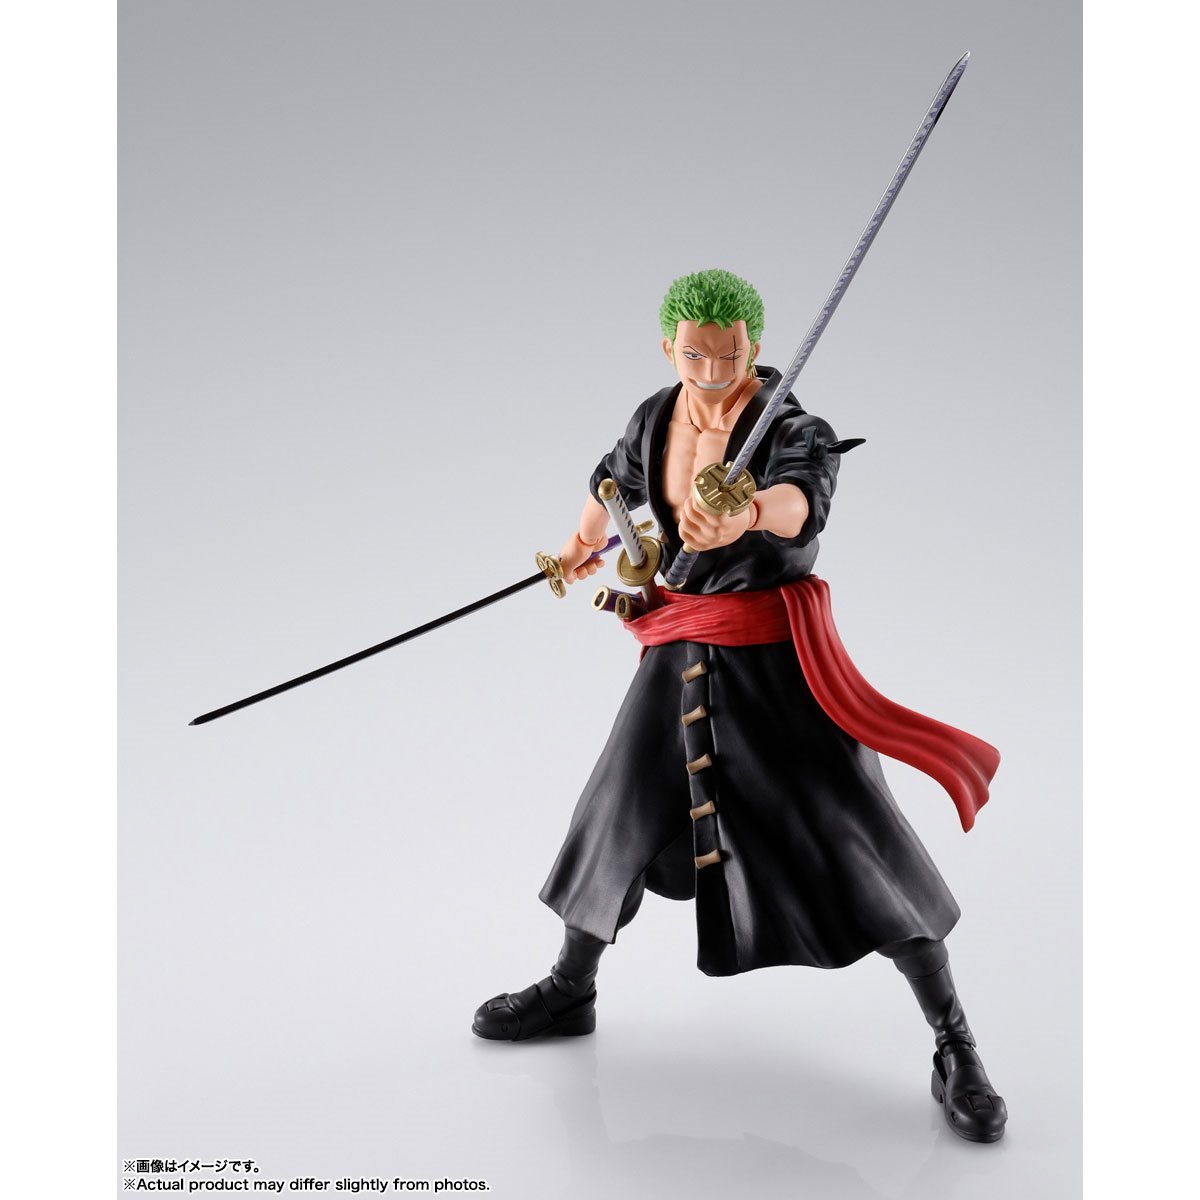 See the One Piece Live-Action Luffy and Zoro SH Figuarts Figures